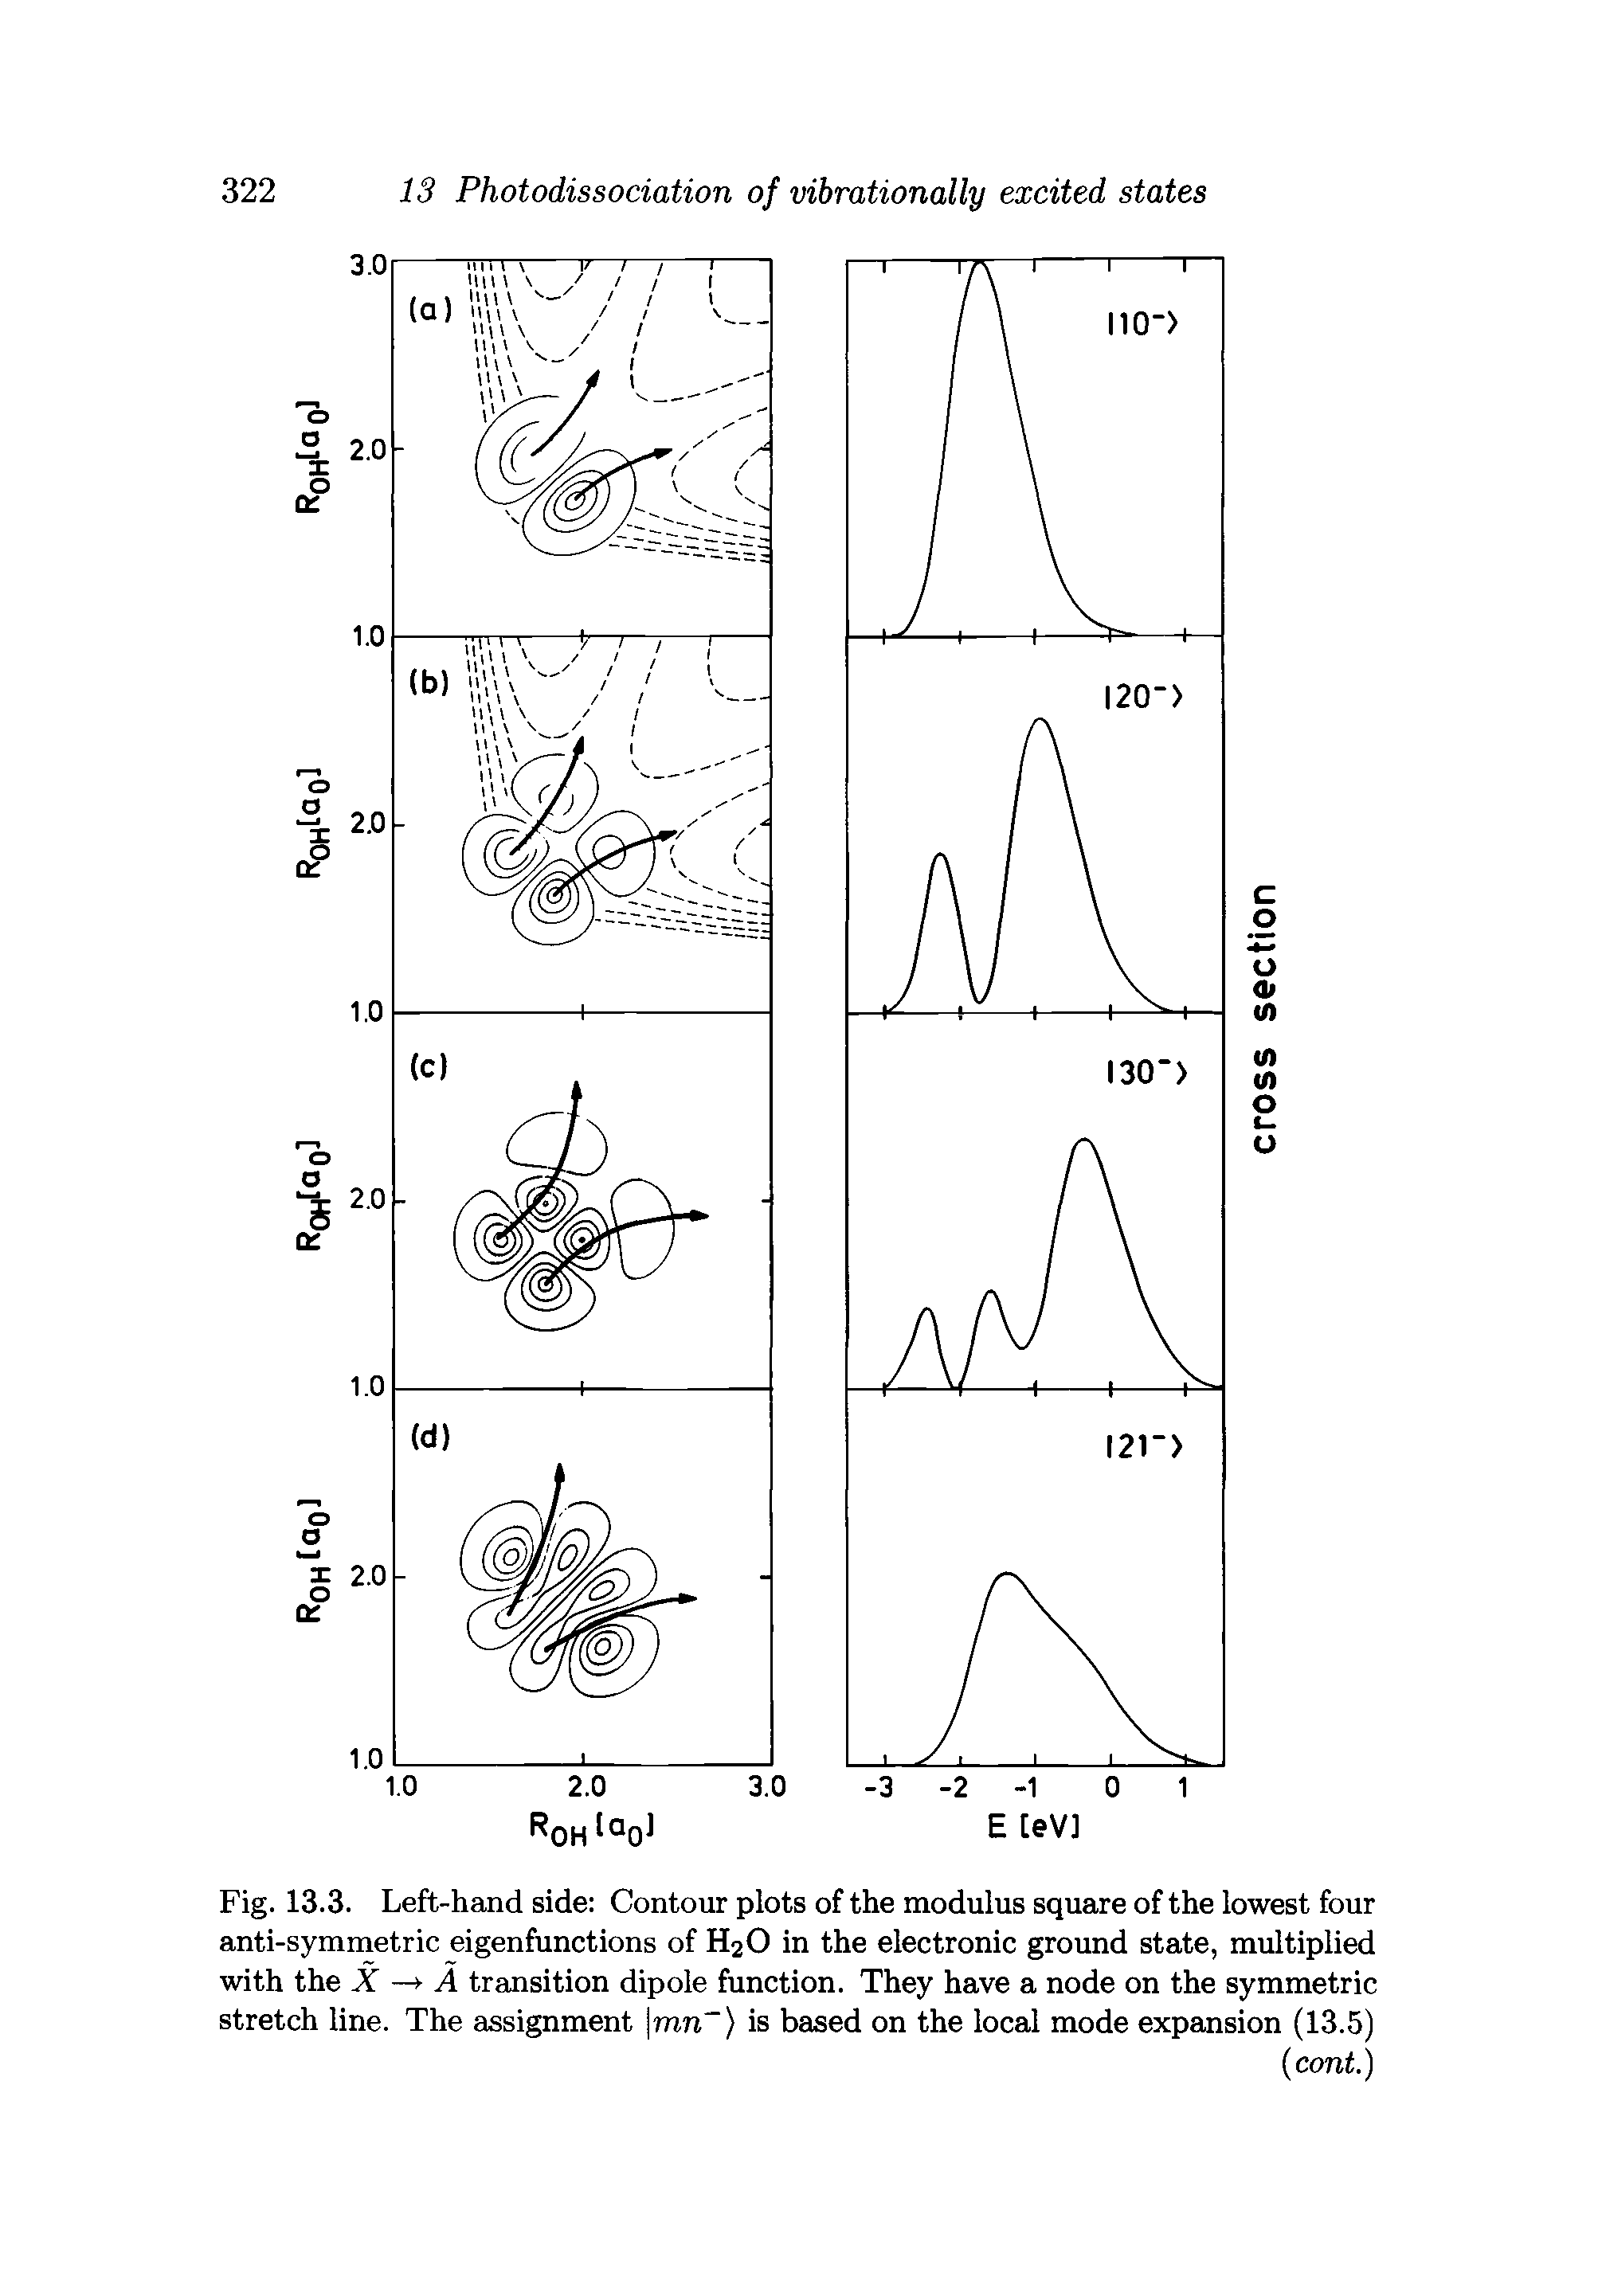 Fig. 13.3. Left-hand side Contour plots of the modulus square of the lowest four anti-symmetric eigenfunctions of H2O in the electronic ground state, multiplied with the X — A transition dipole function. They have a node on the symmetric stretch line. The assignment rnn ) is based on the local mode expansion (13.5)...